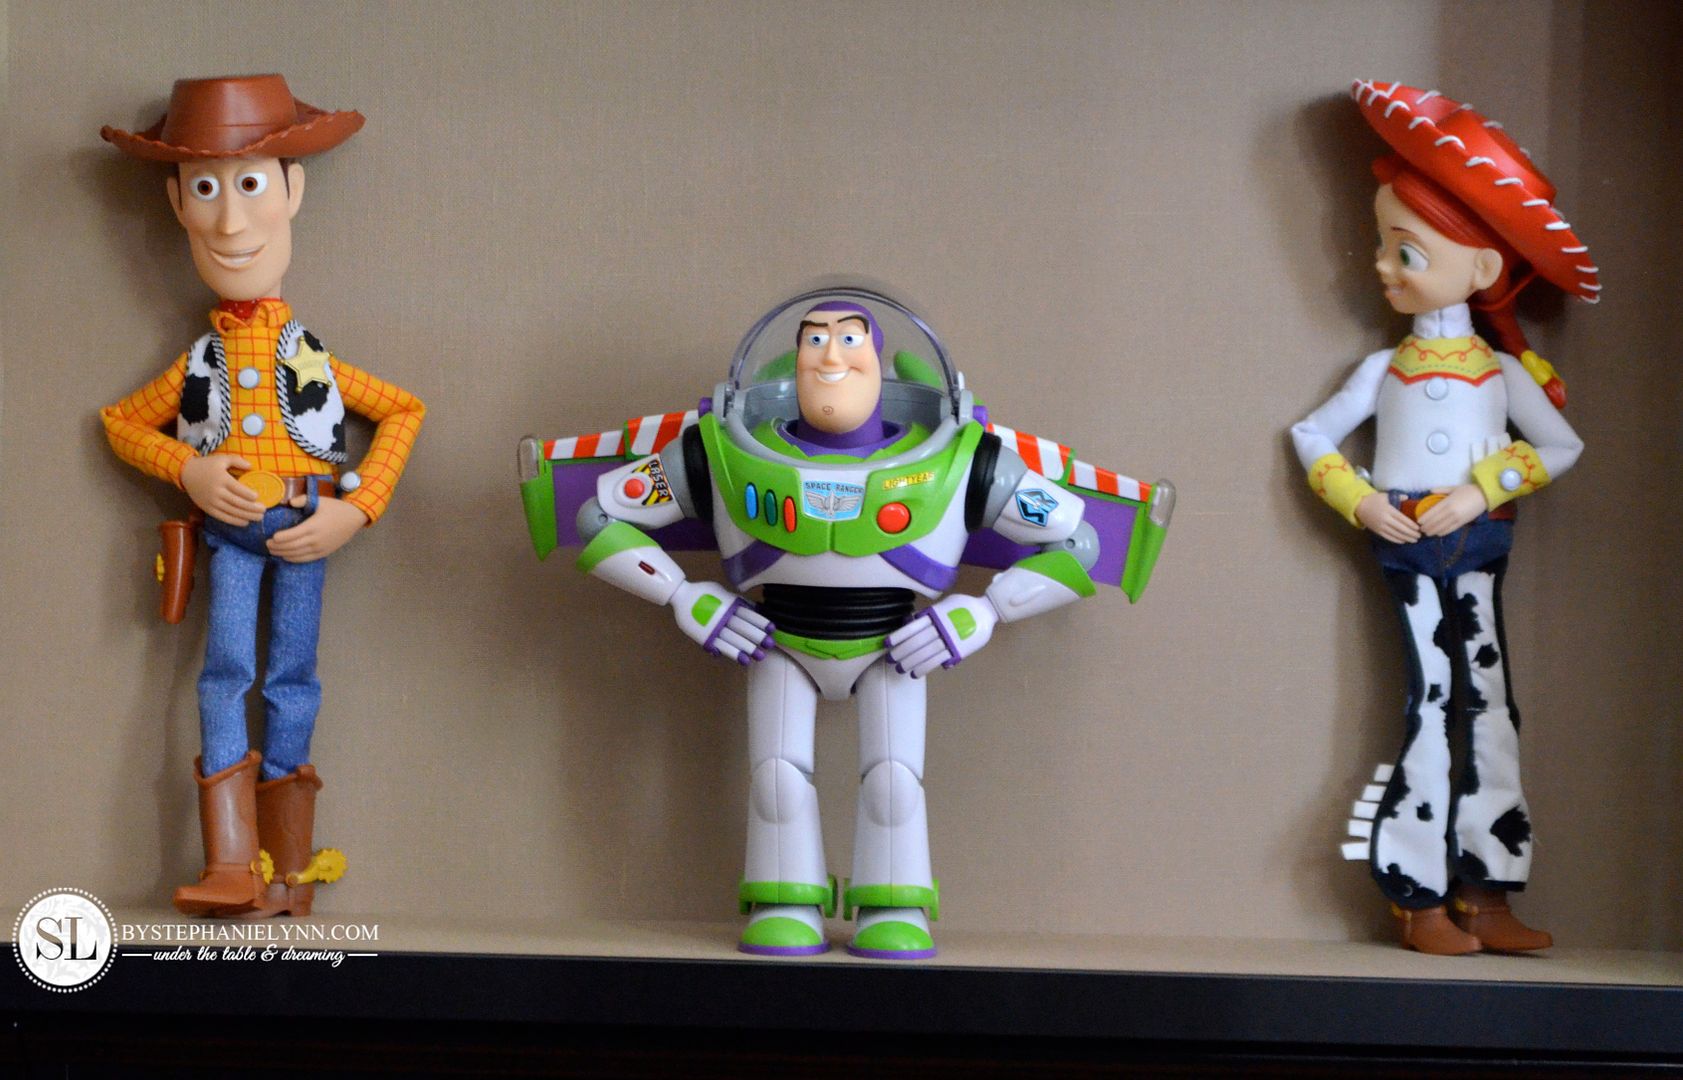 Toy Story Wall Art